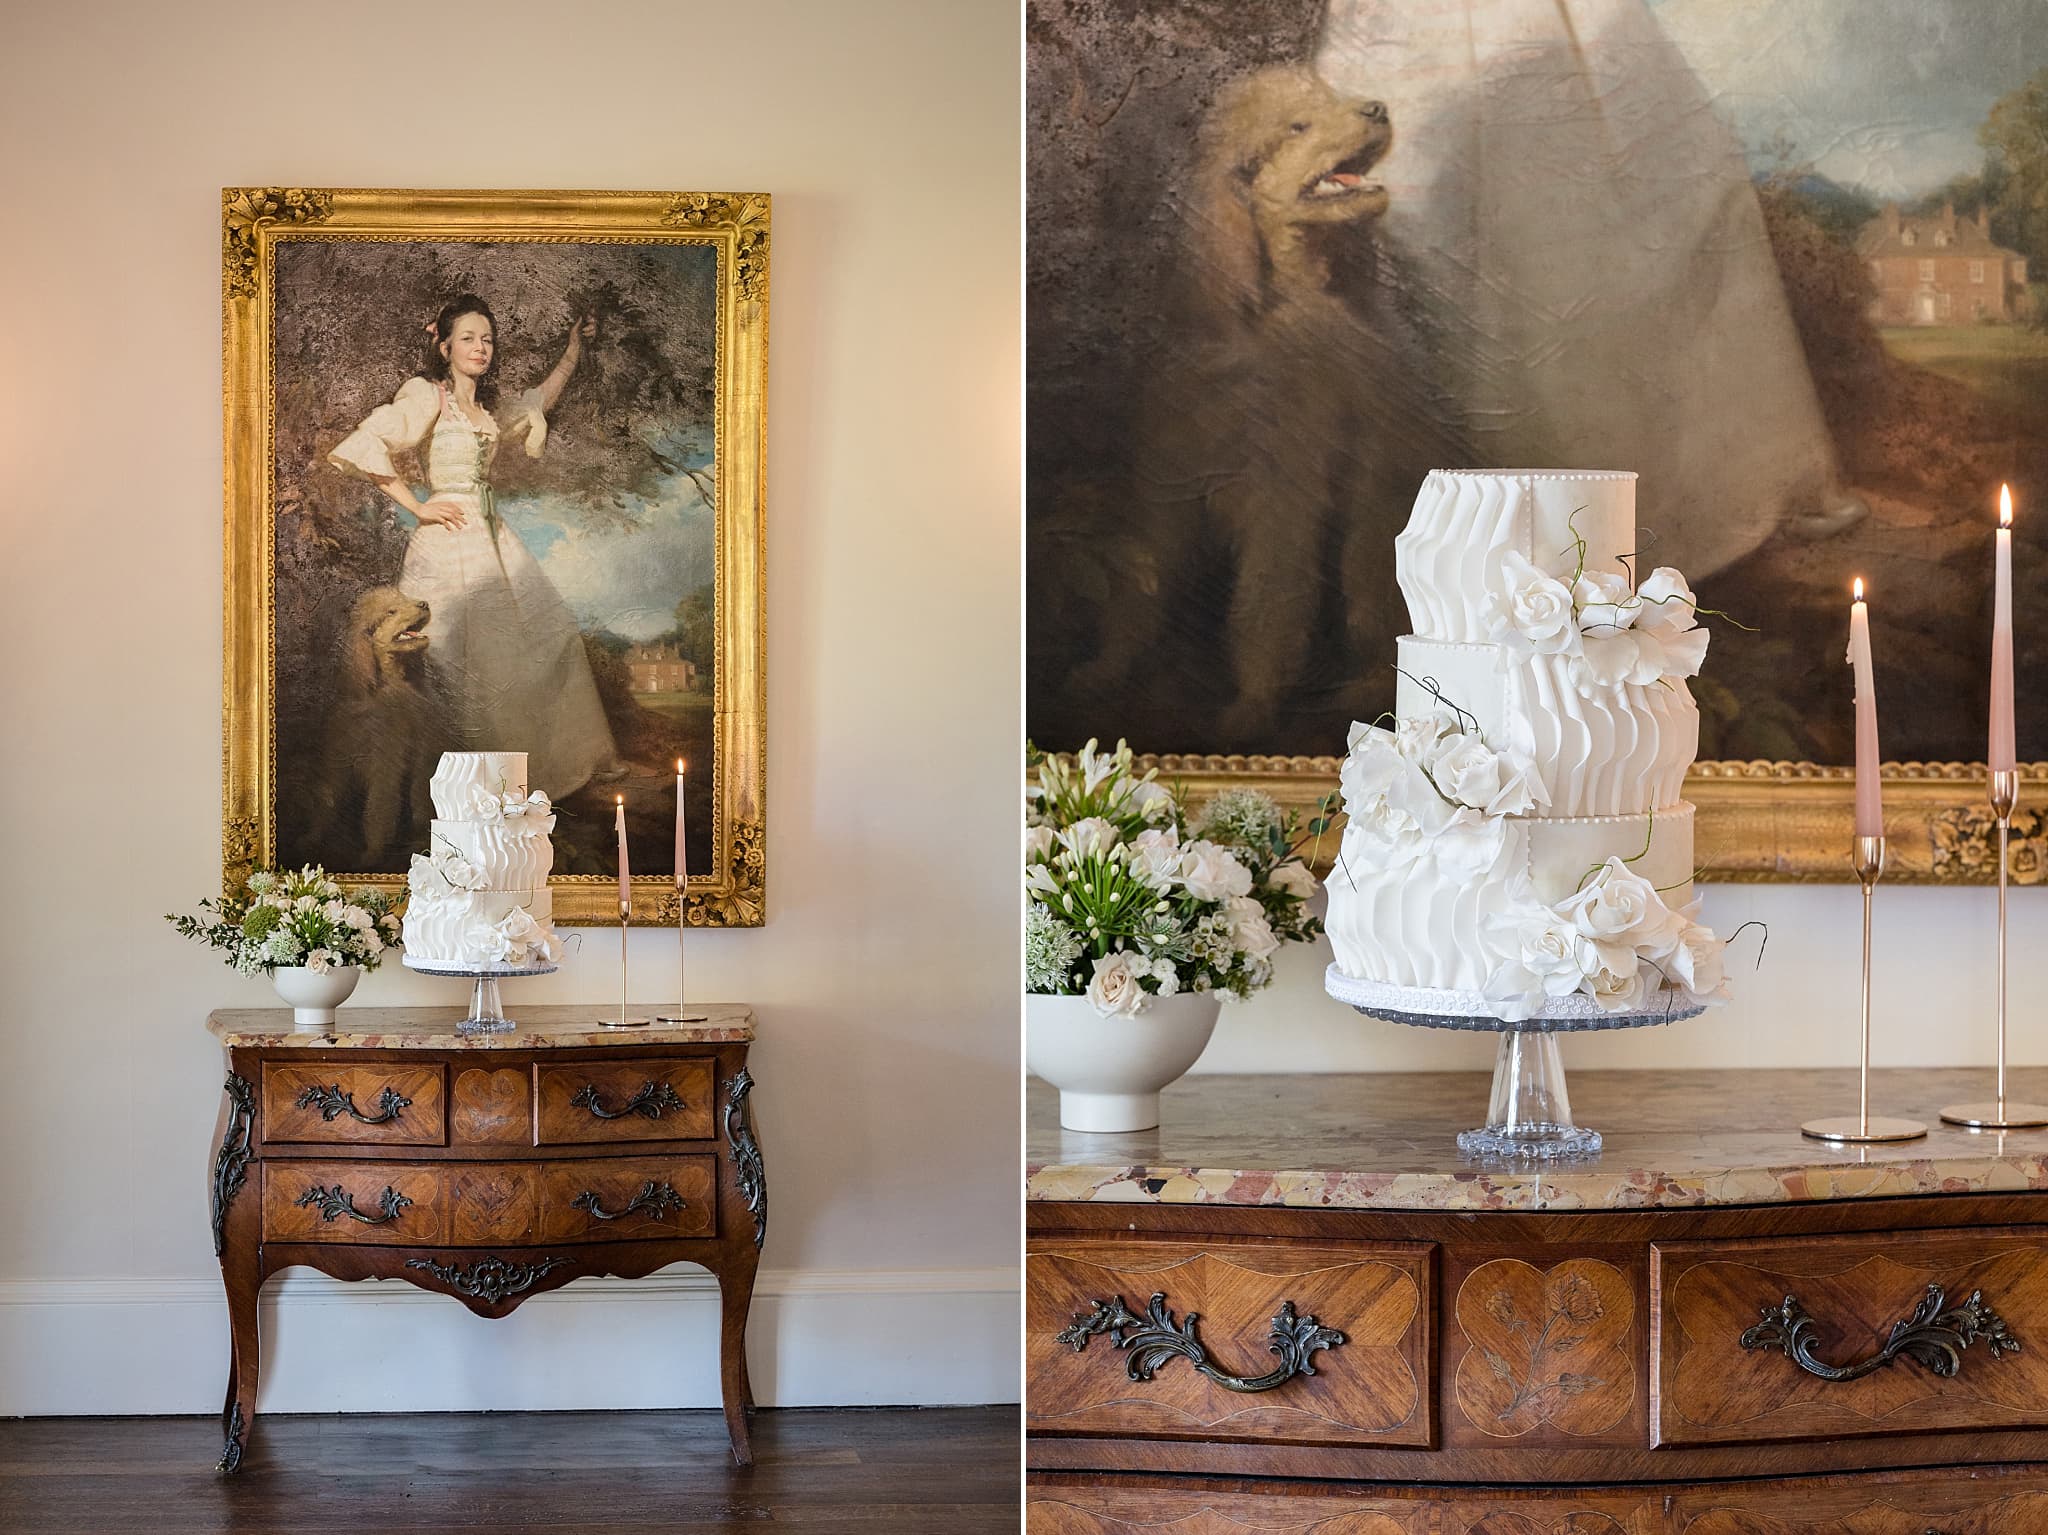 White wedding cake with wavy frills and sugar flowers on top of a vintage dresser in front of an antique painting at Sutton Bonington Hall